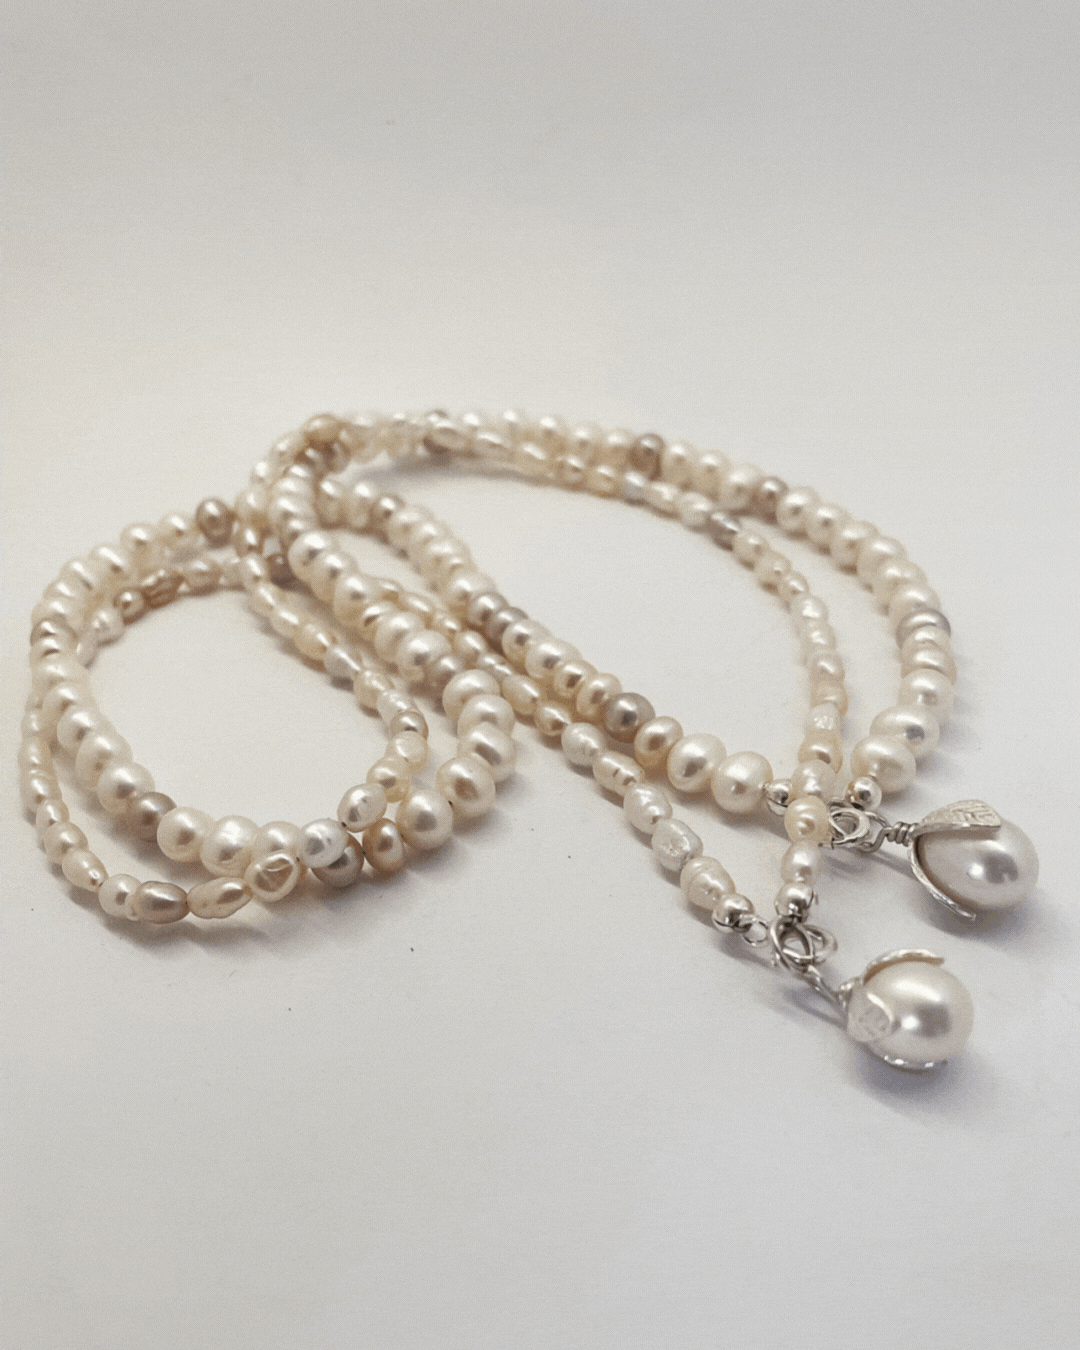 A short video showing two one-of-a-kind Glow Pearl Necklaces  with a Pearl pendant